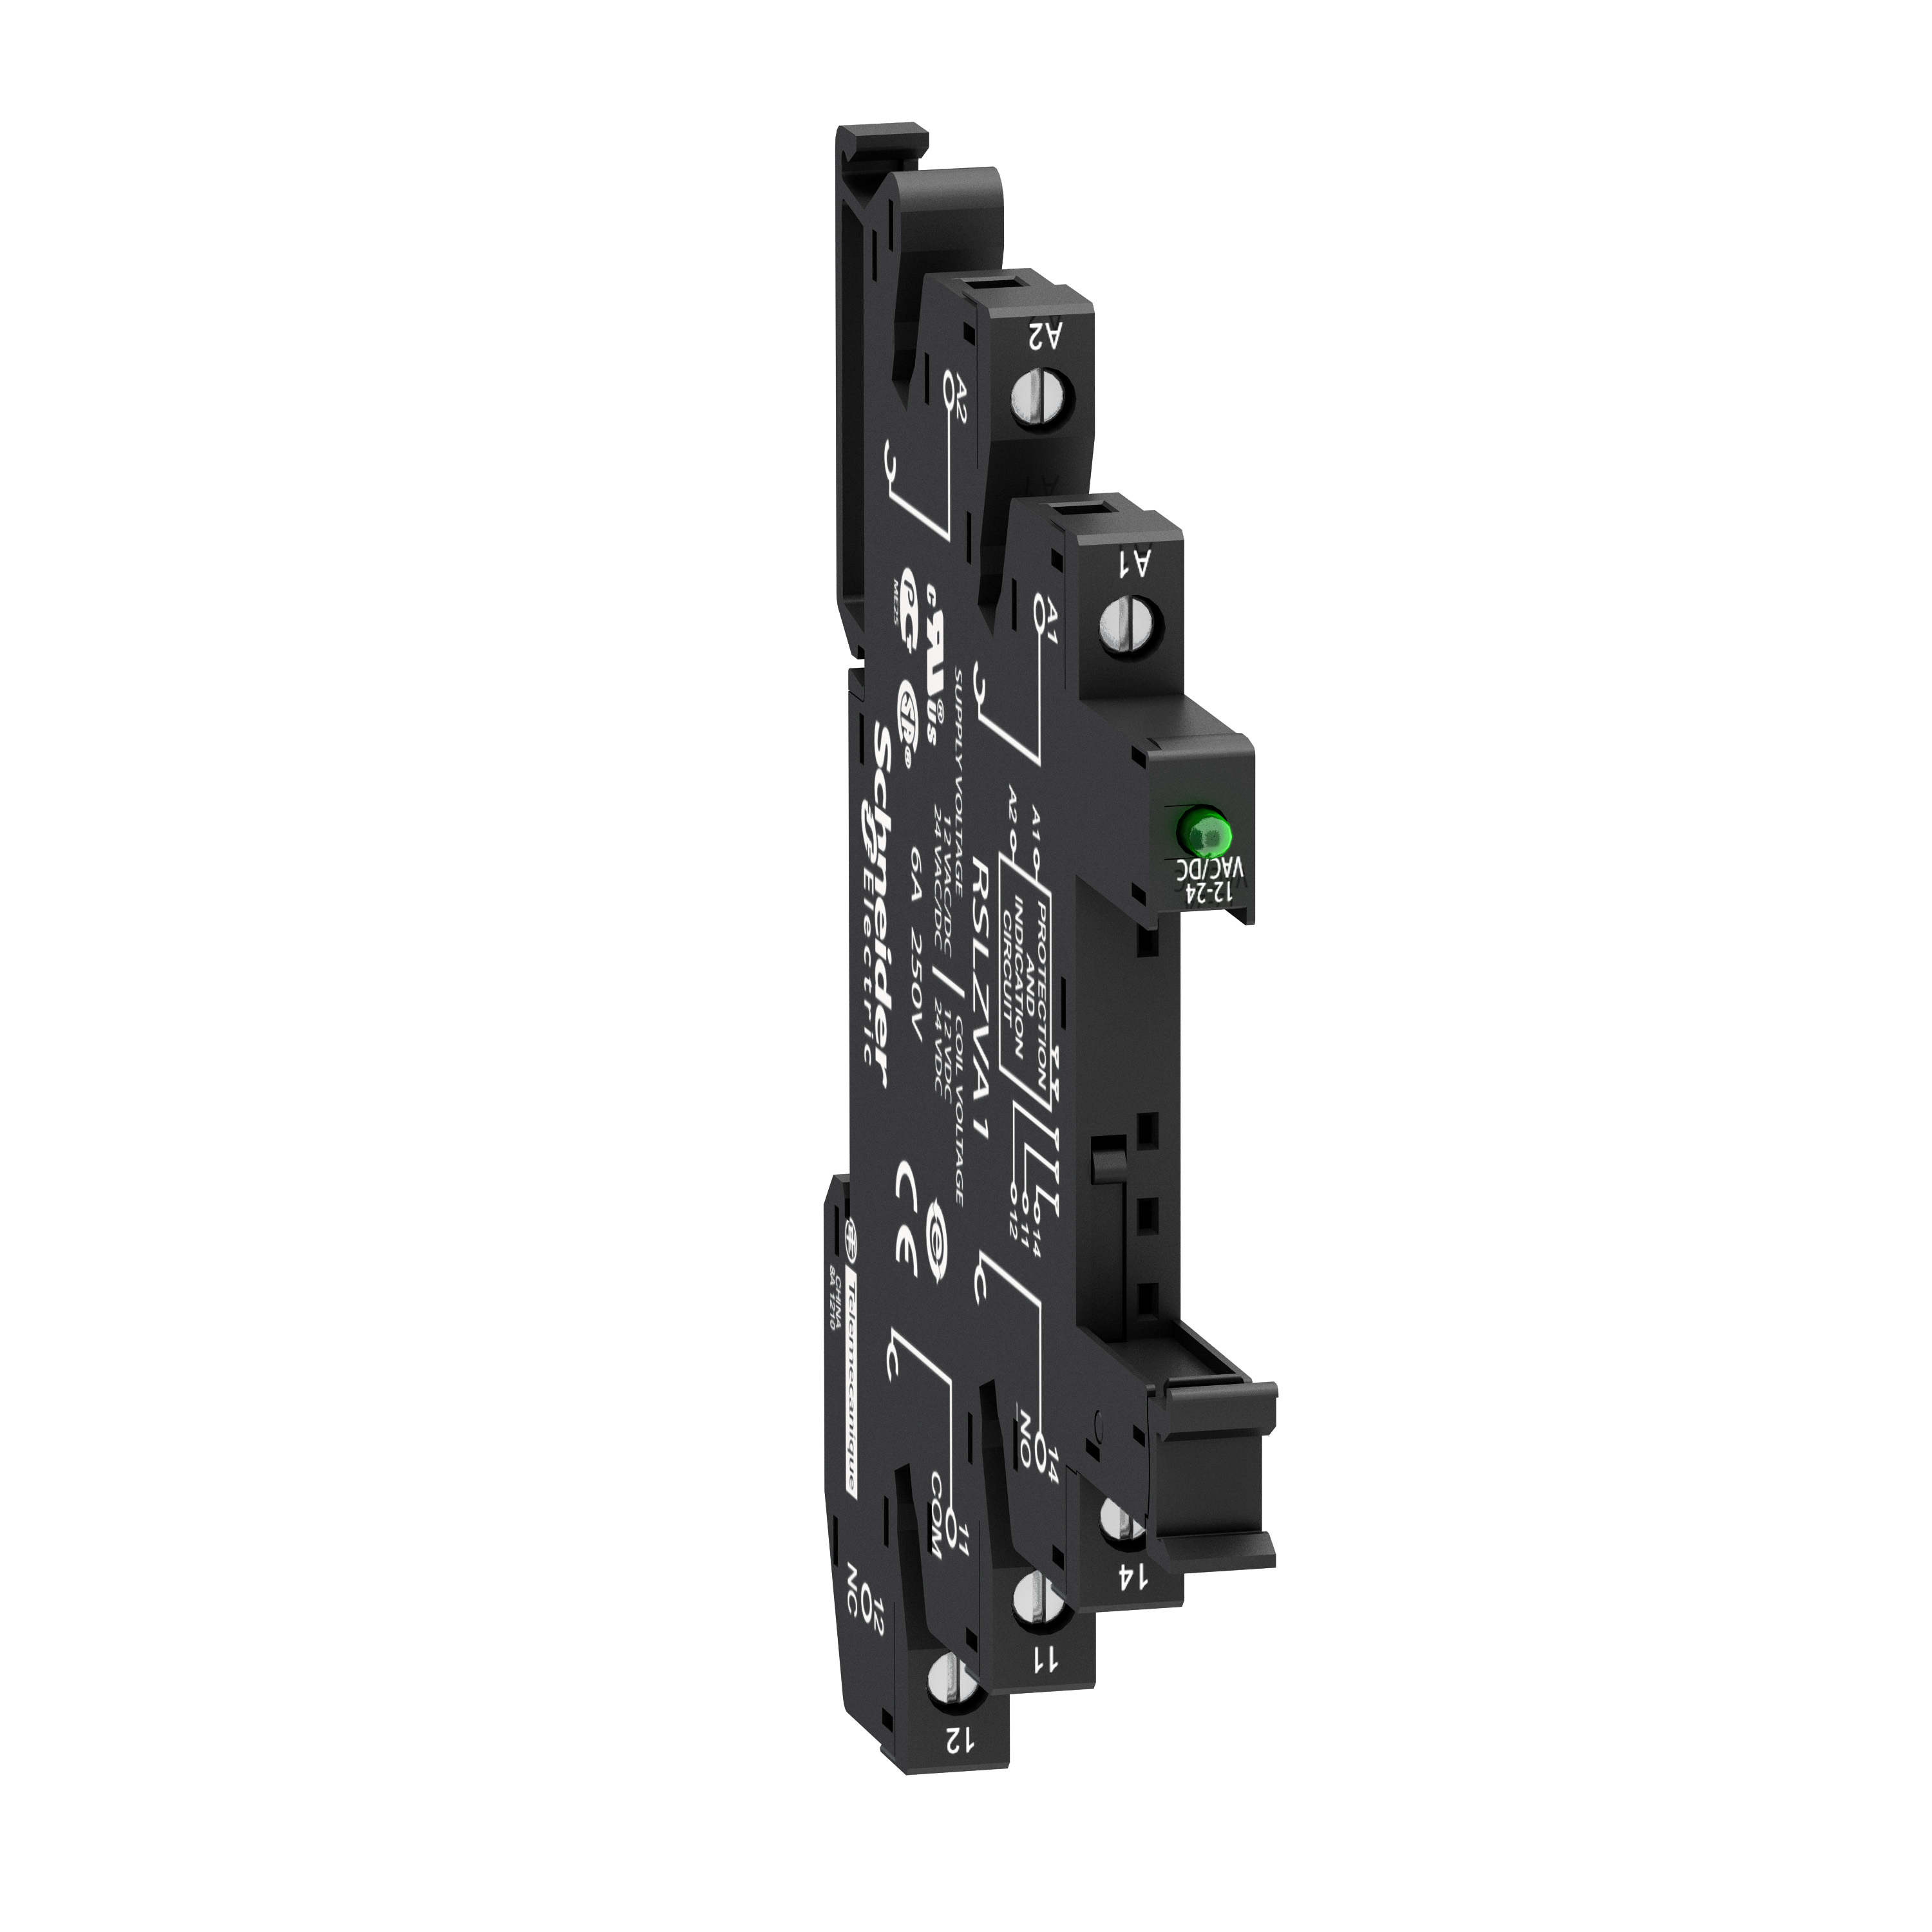 socket equipped with LED and protection circuit, Harmony Electromechanical Relays, for RSL1 relays, srew connec to r, 12 to 24V AC DC